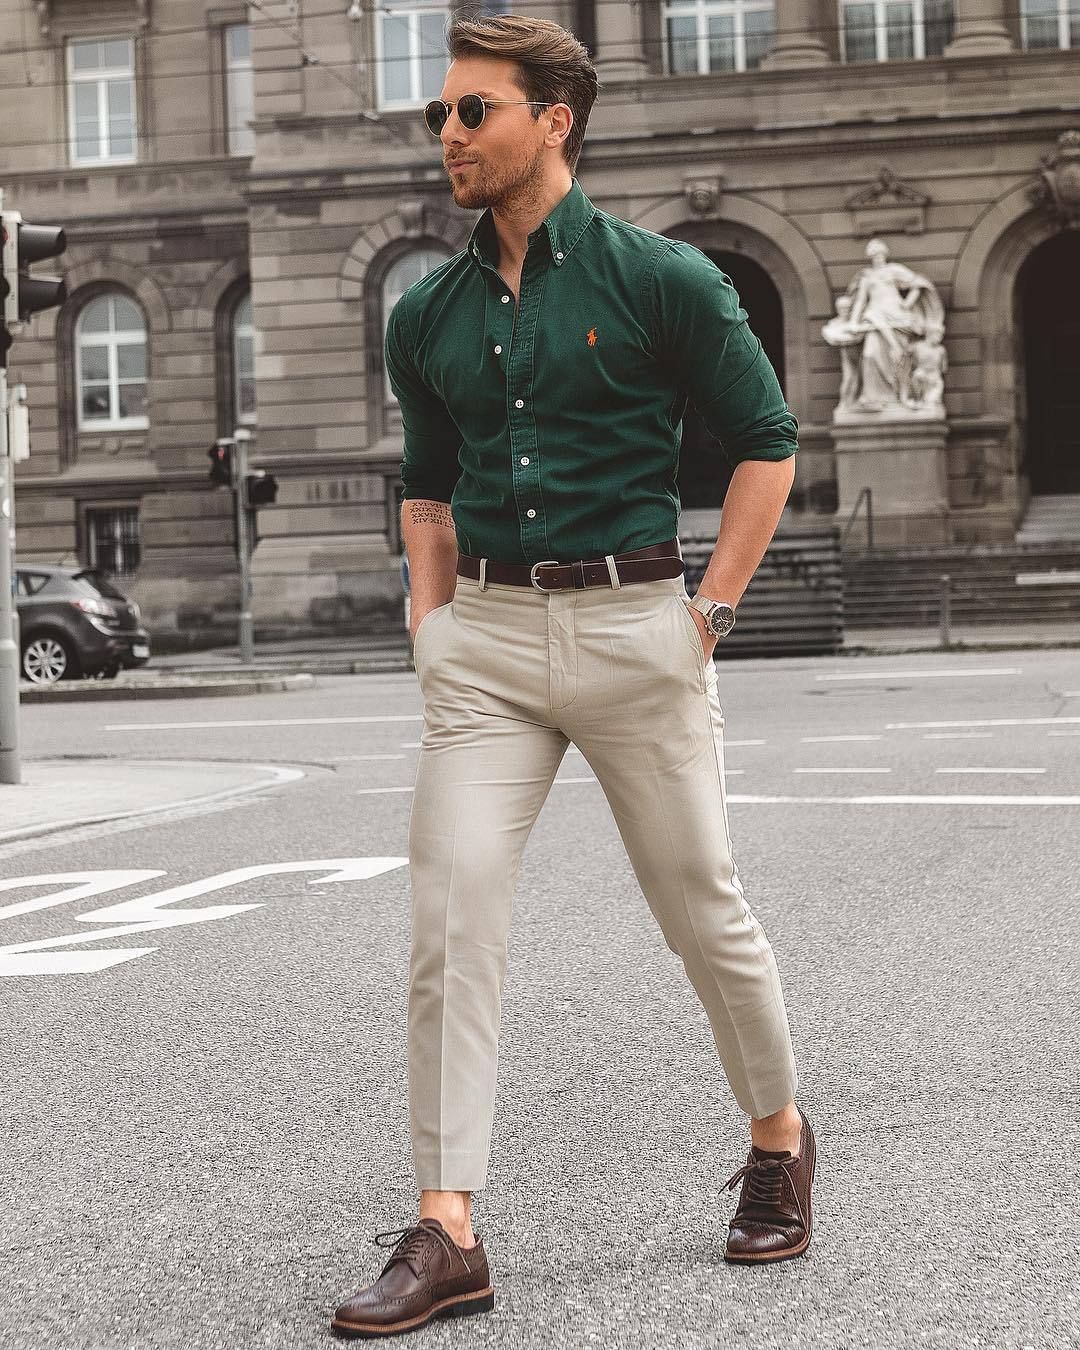 The Essential Guide to Styling Chinos for
Men